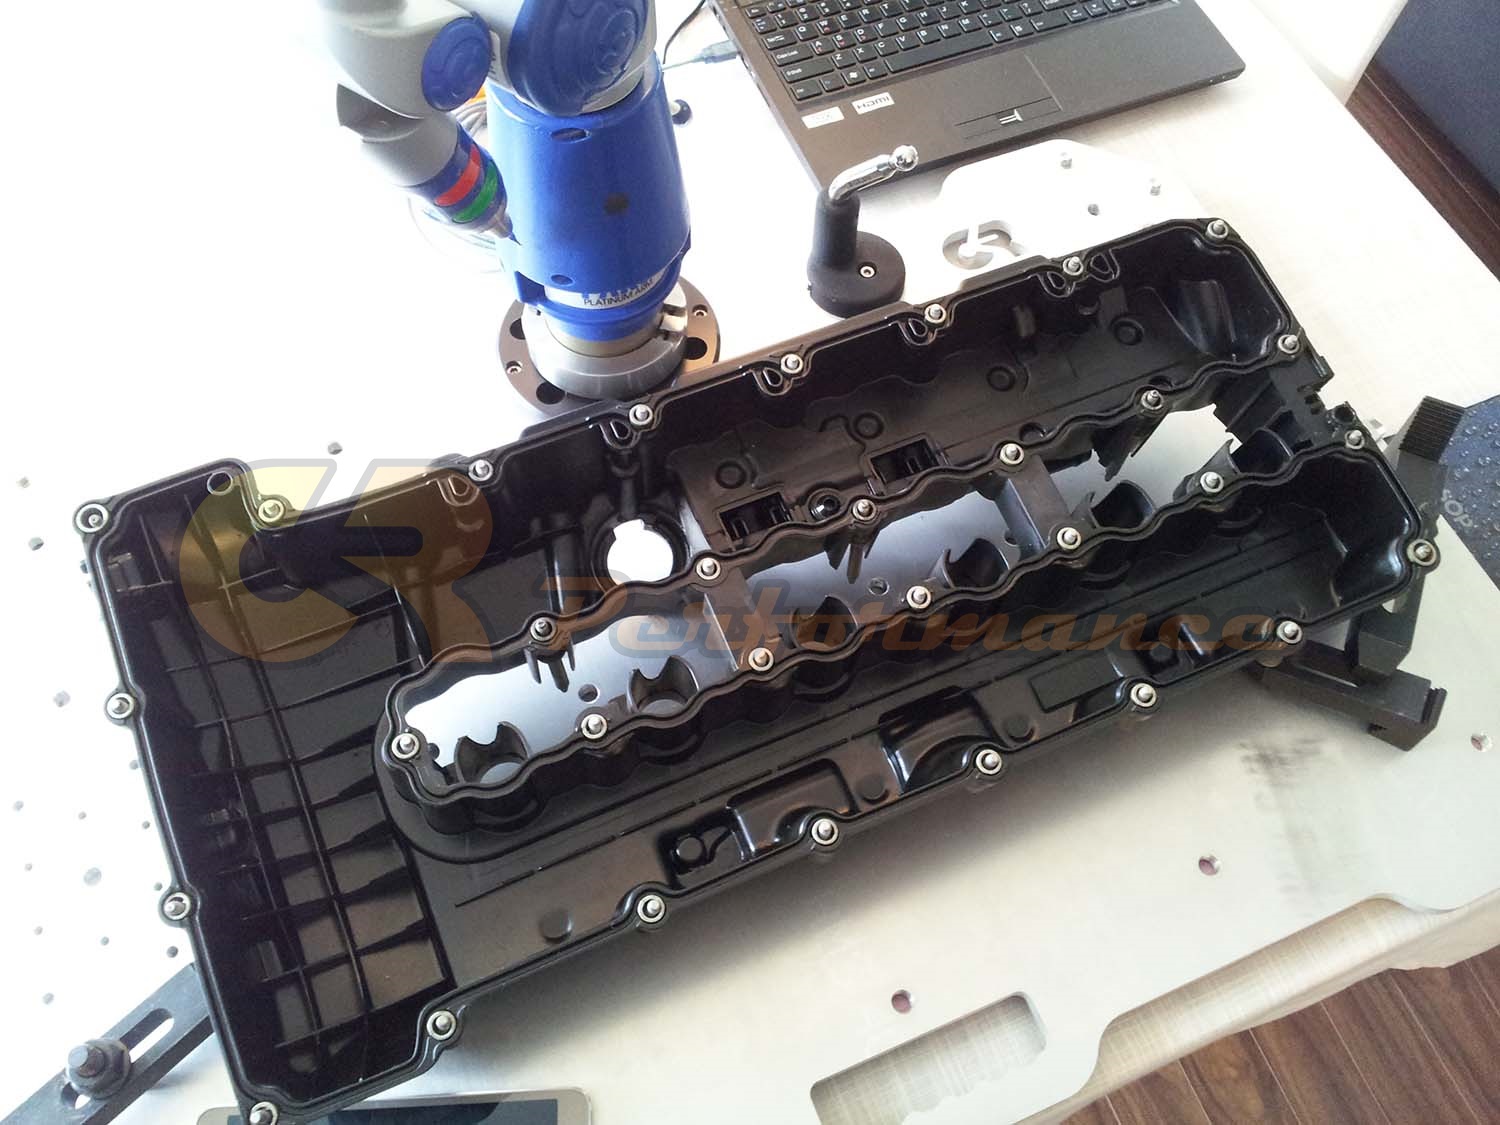 BMW N54 Valve Cover in process of scanning.